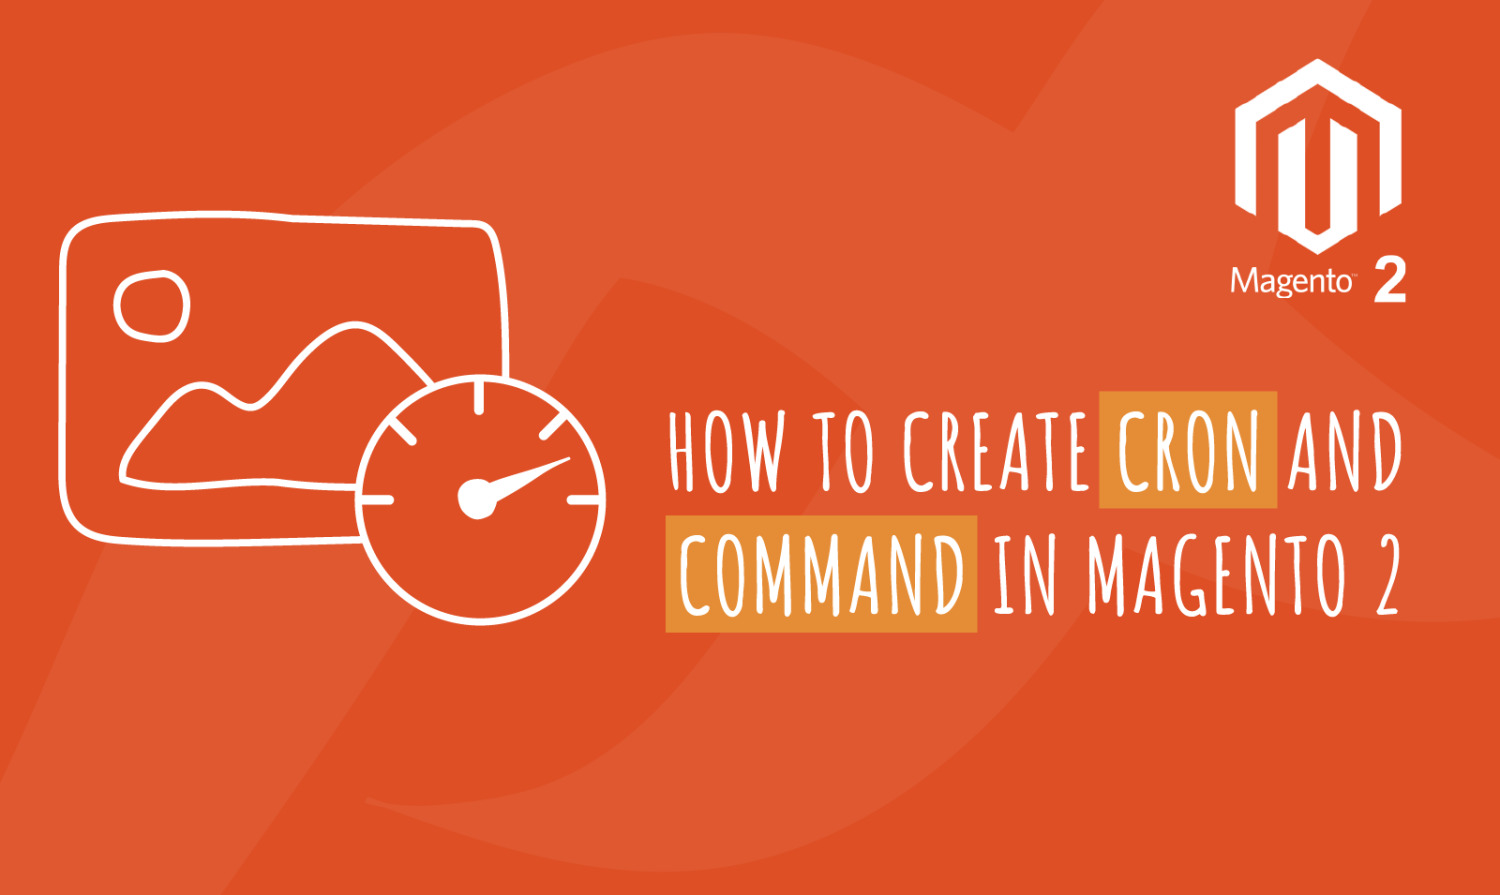 How to create cron and command in Magento 2?